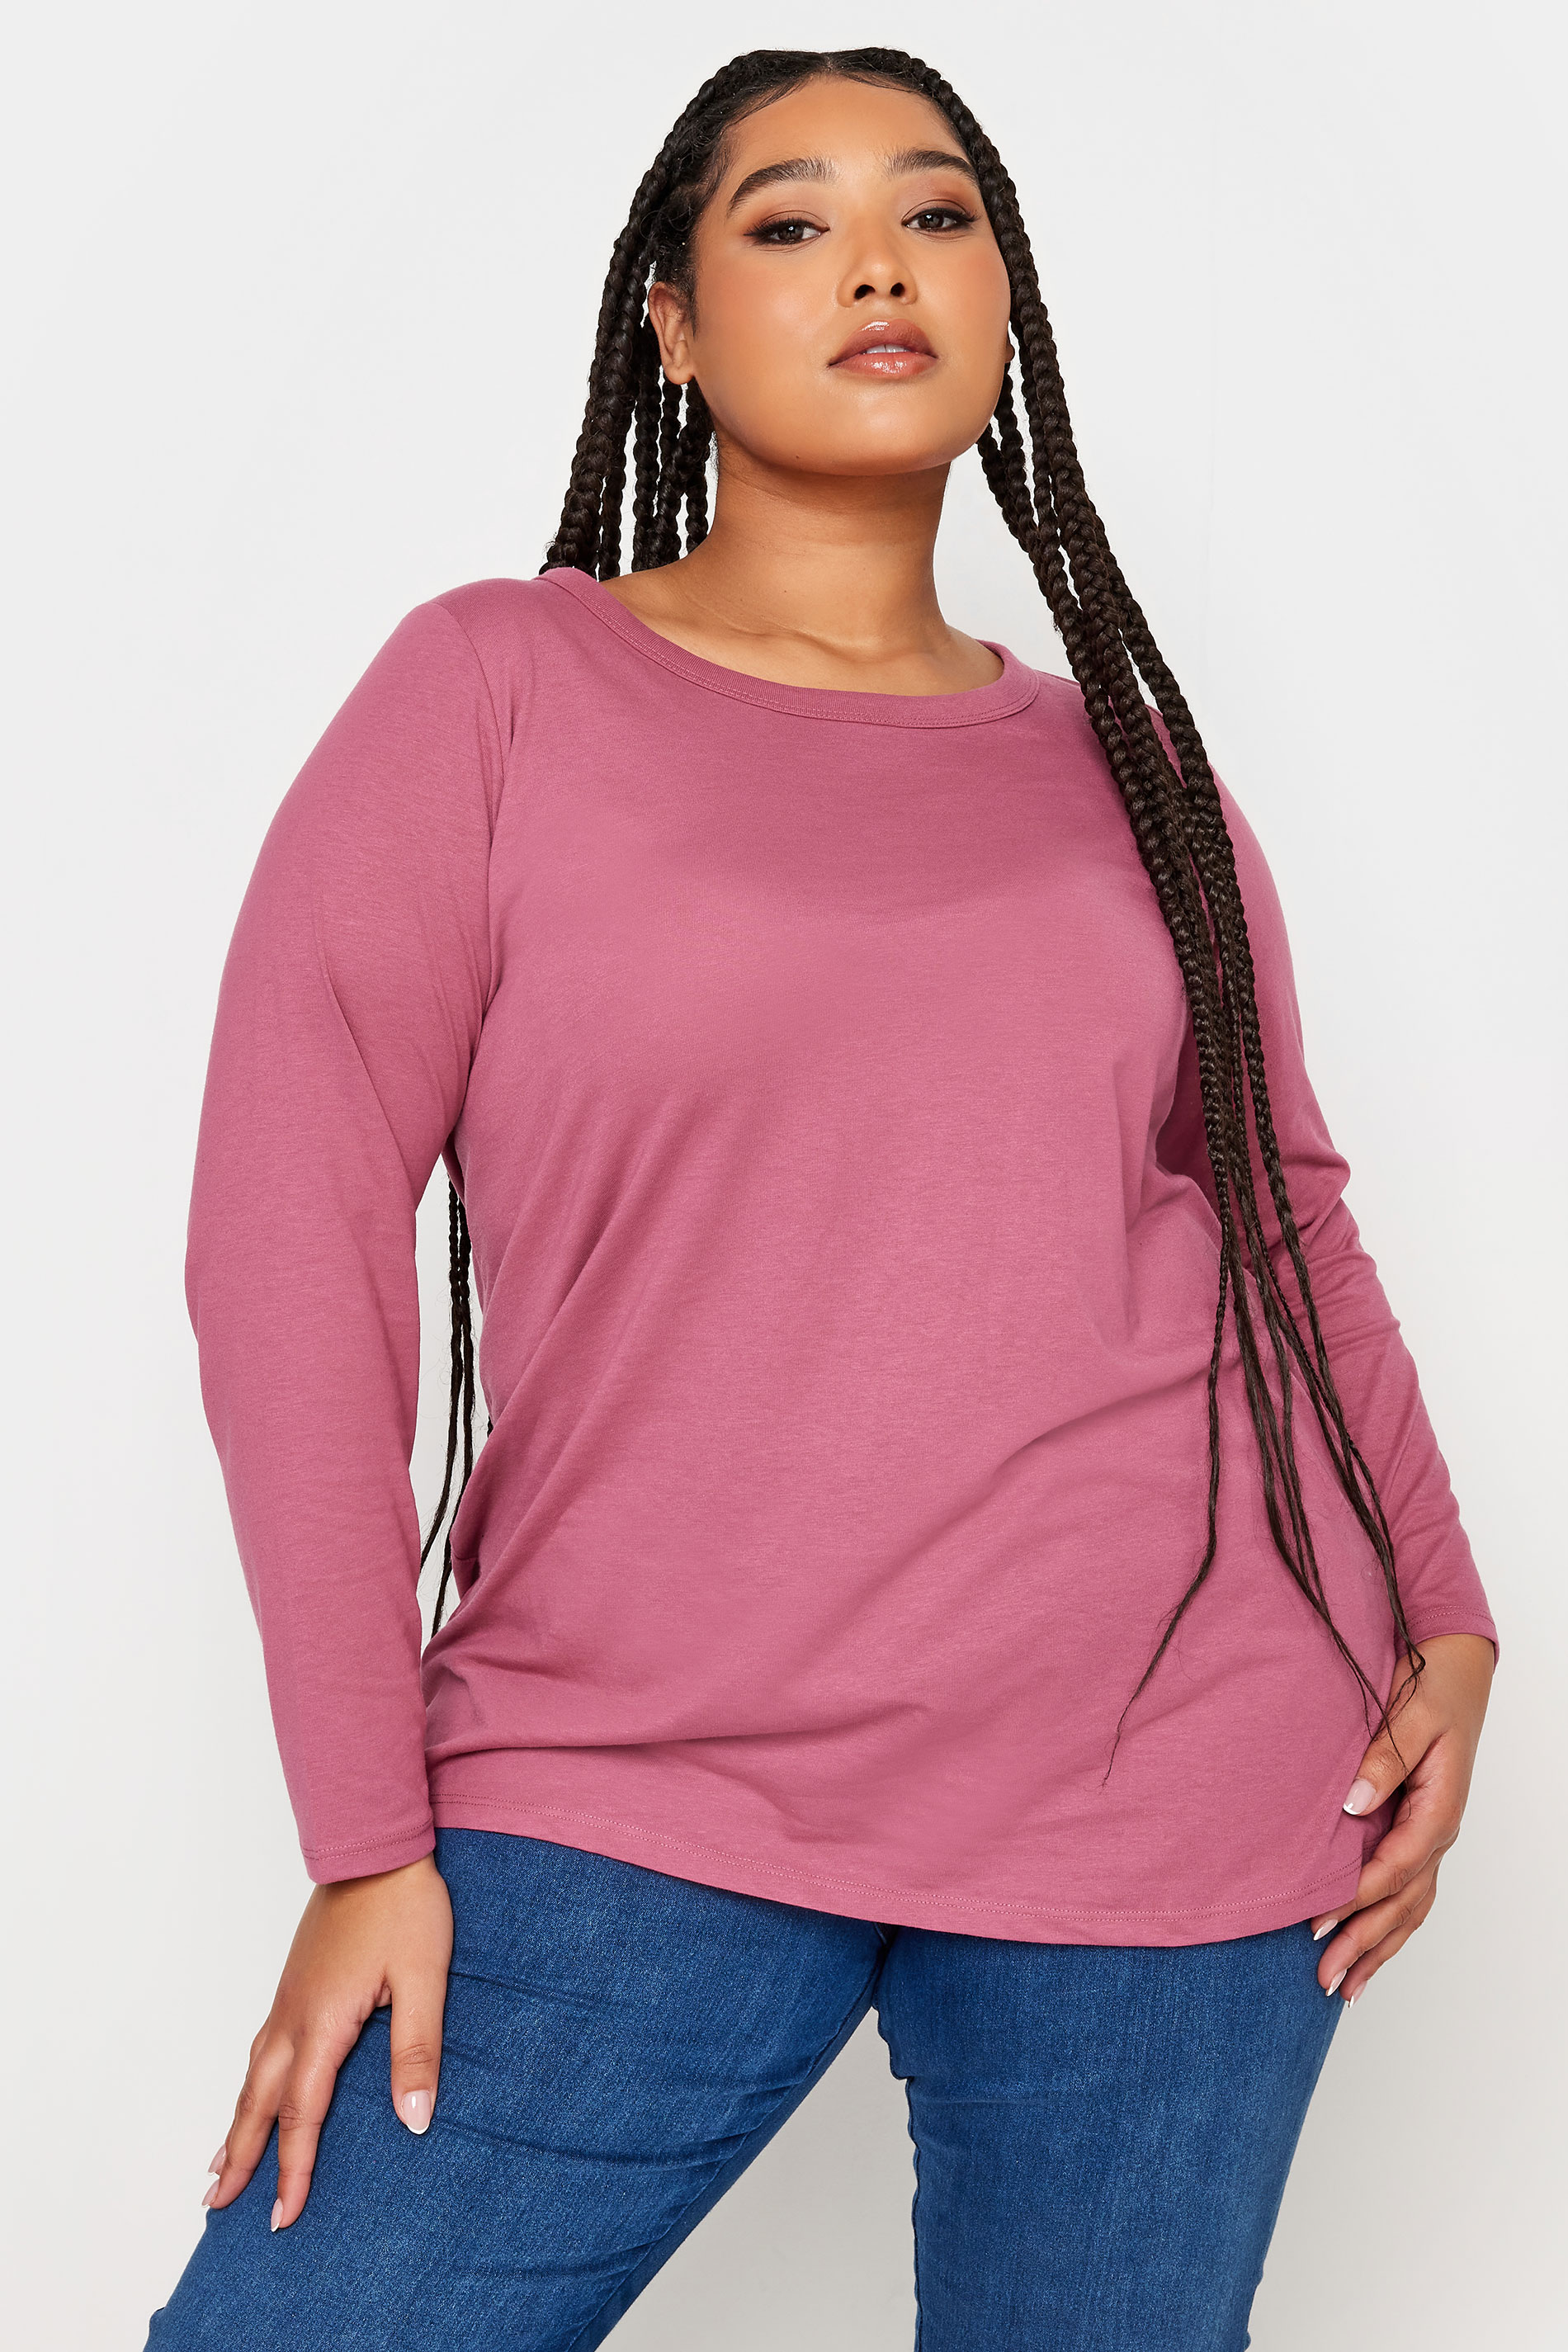 YOURS 3 PACK Plus Size Pink & Black Long Sleeve Tops | Yours Clothing 2